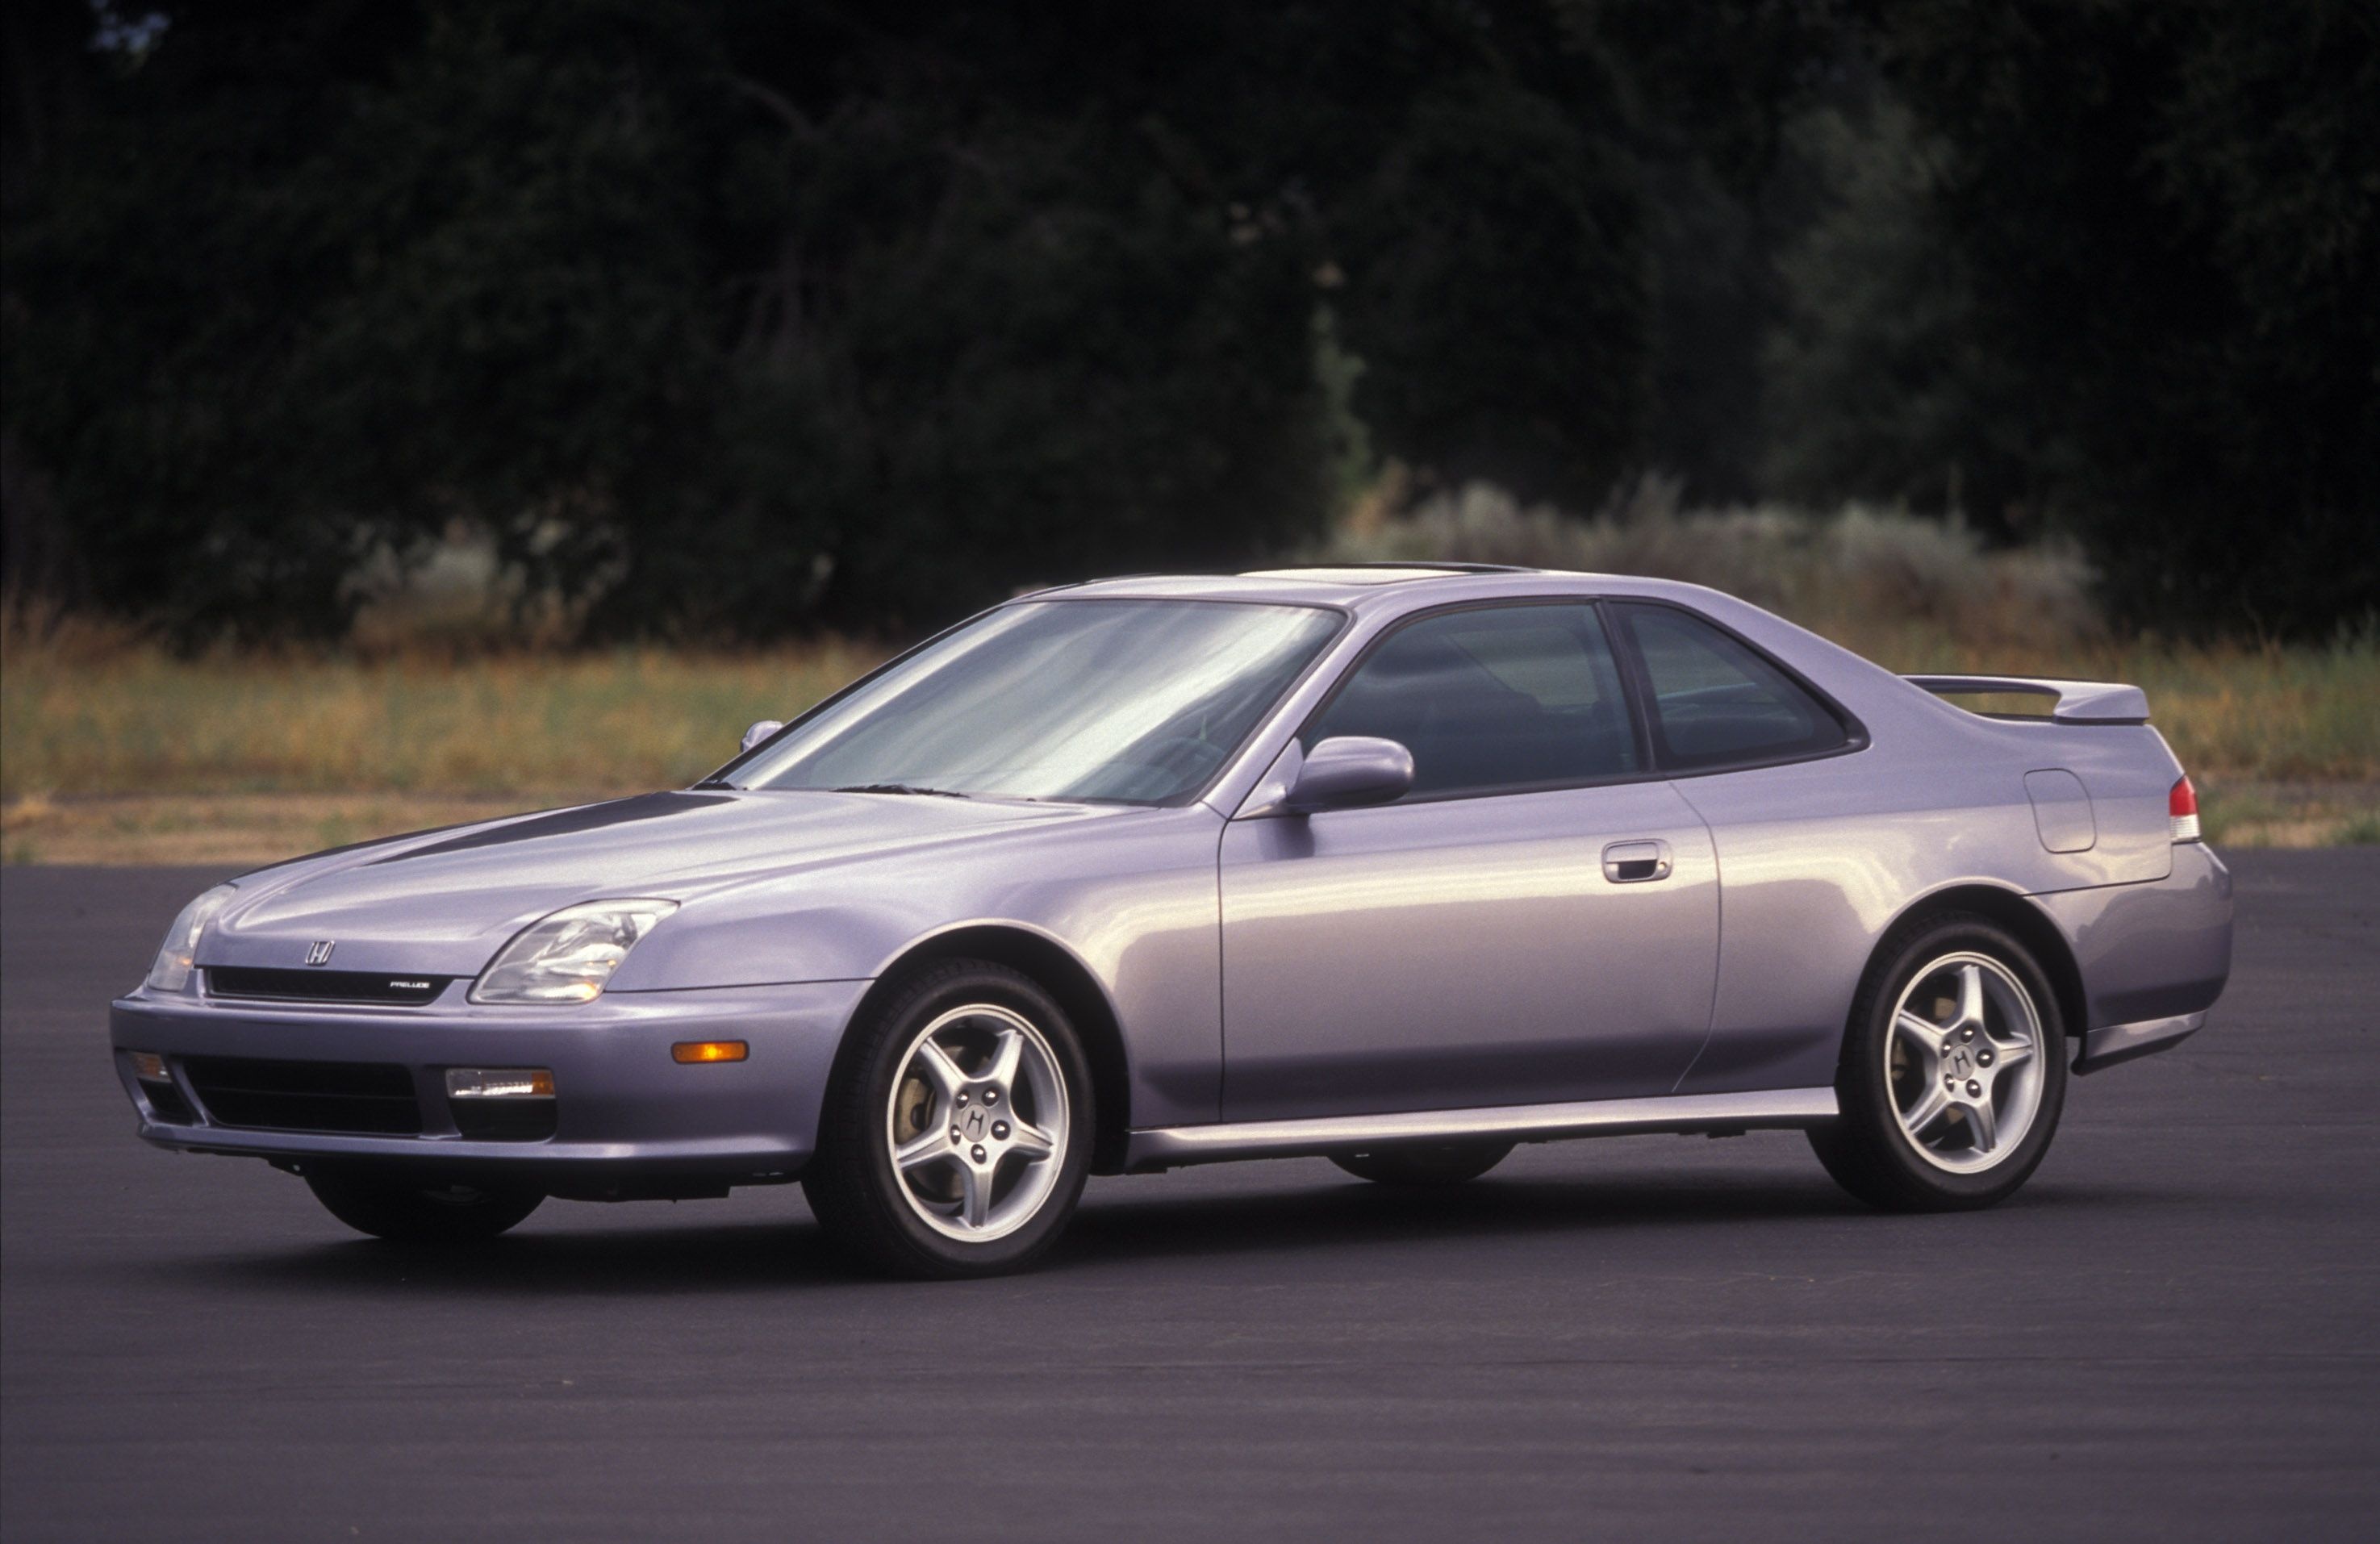 The 1999 Honda Prelude SH Is a Rolling Metaphor of My Youth 2950x1920